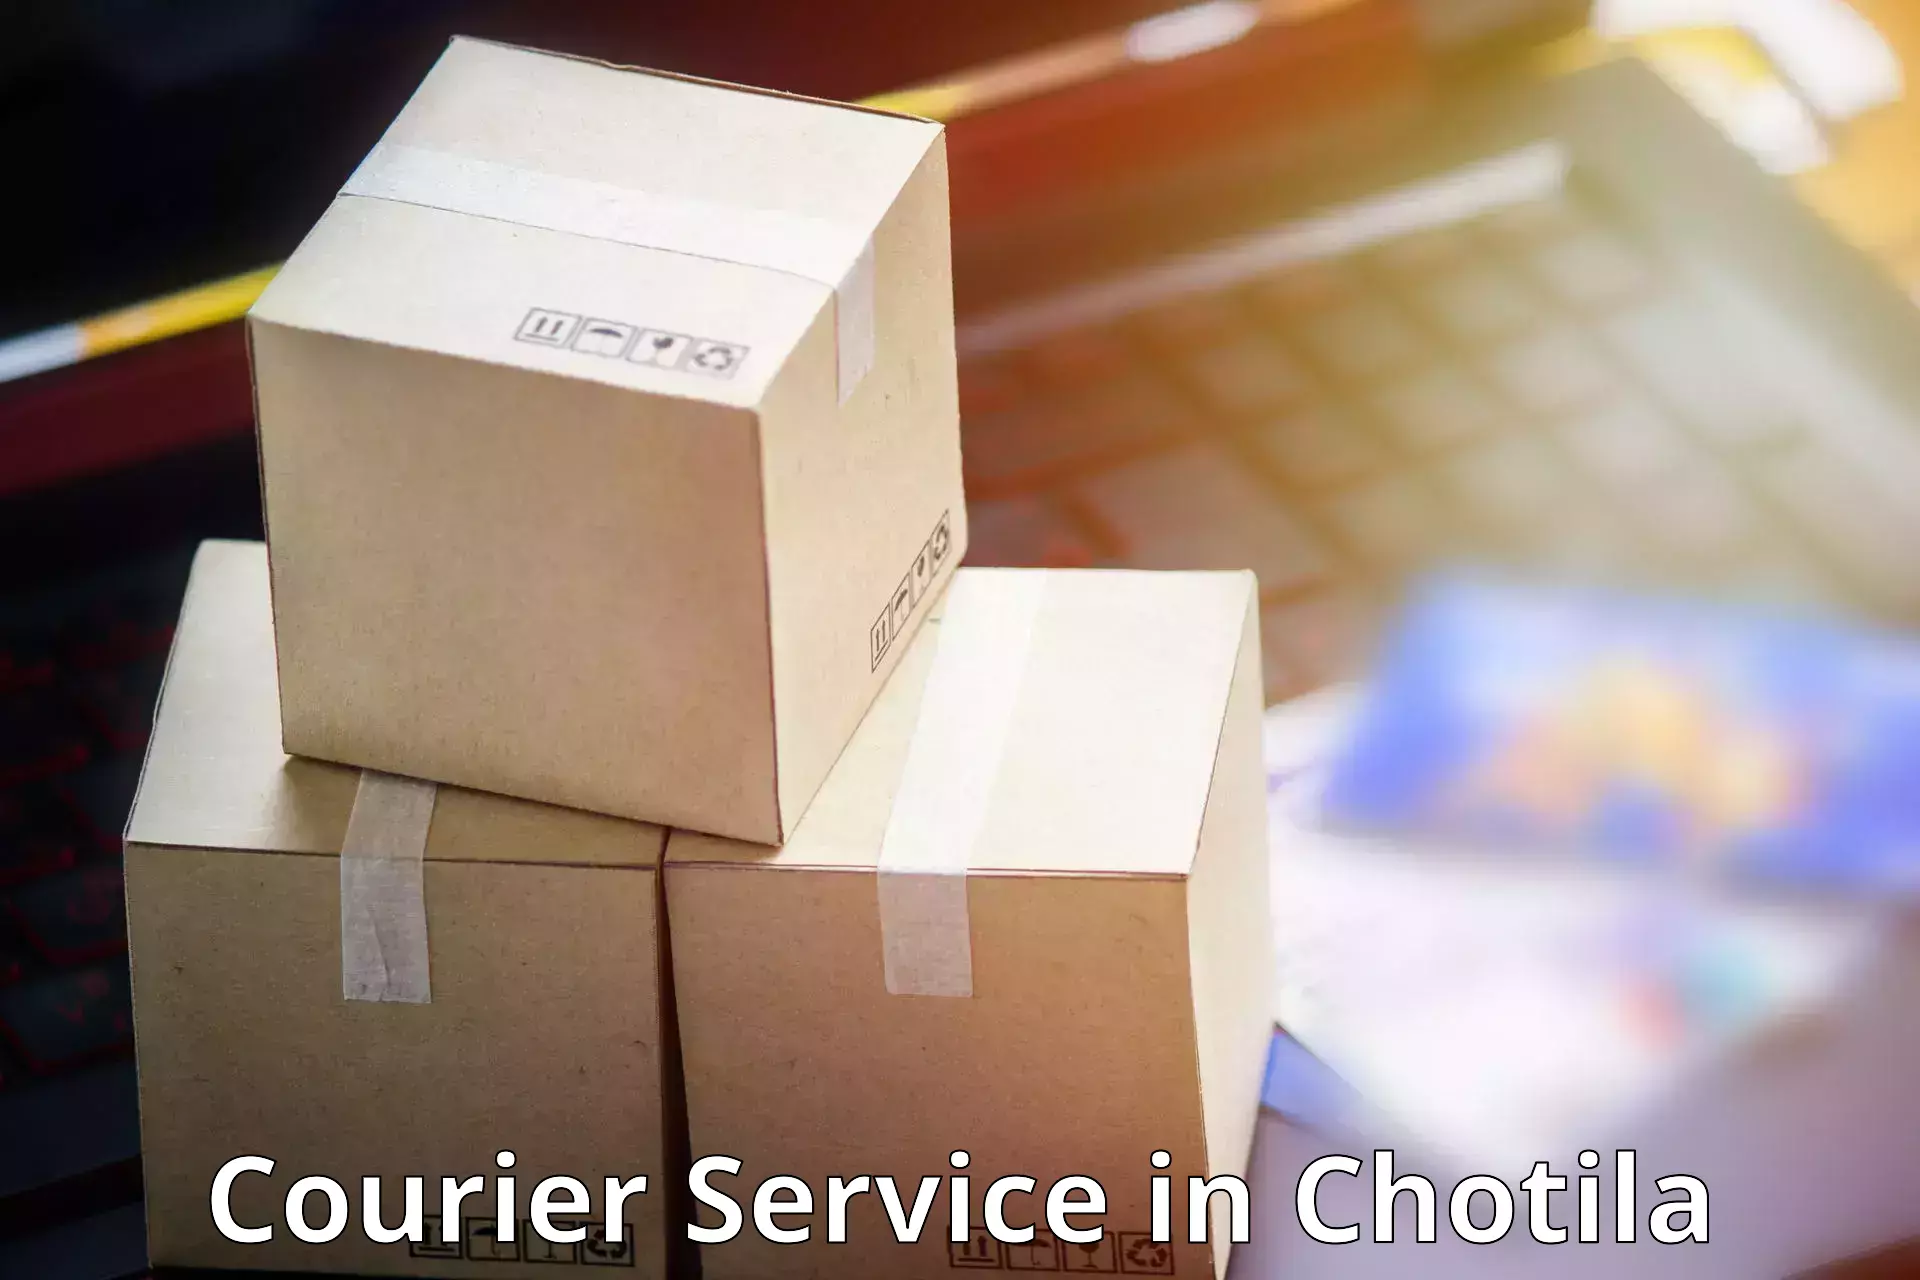 Rapid freight solutions in Chotila